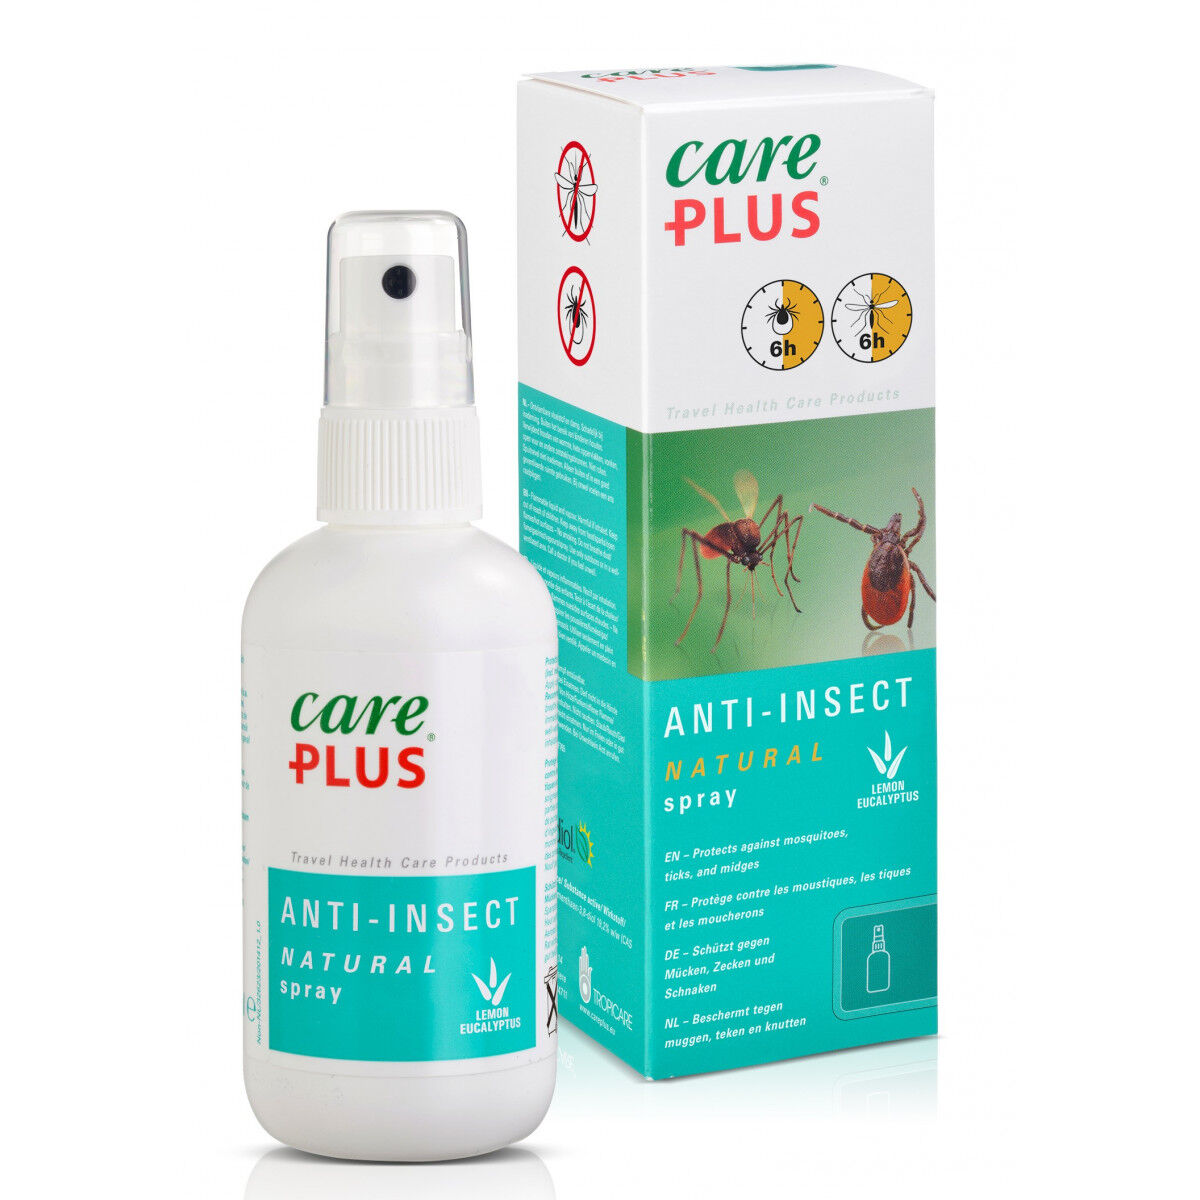 Care Plus Anti-Insect - Natural spray Citriodiol - Produkty przeciw insektom | Hardloop